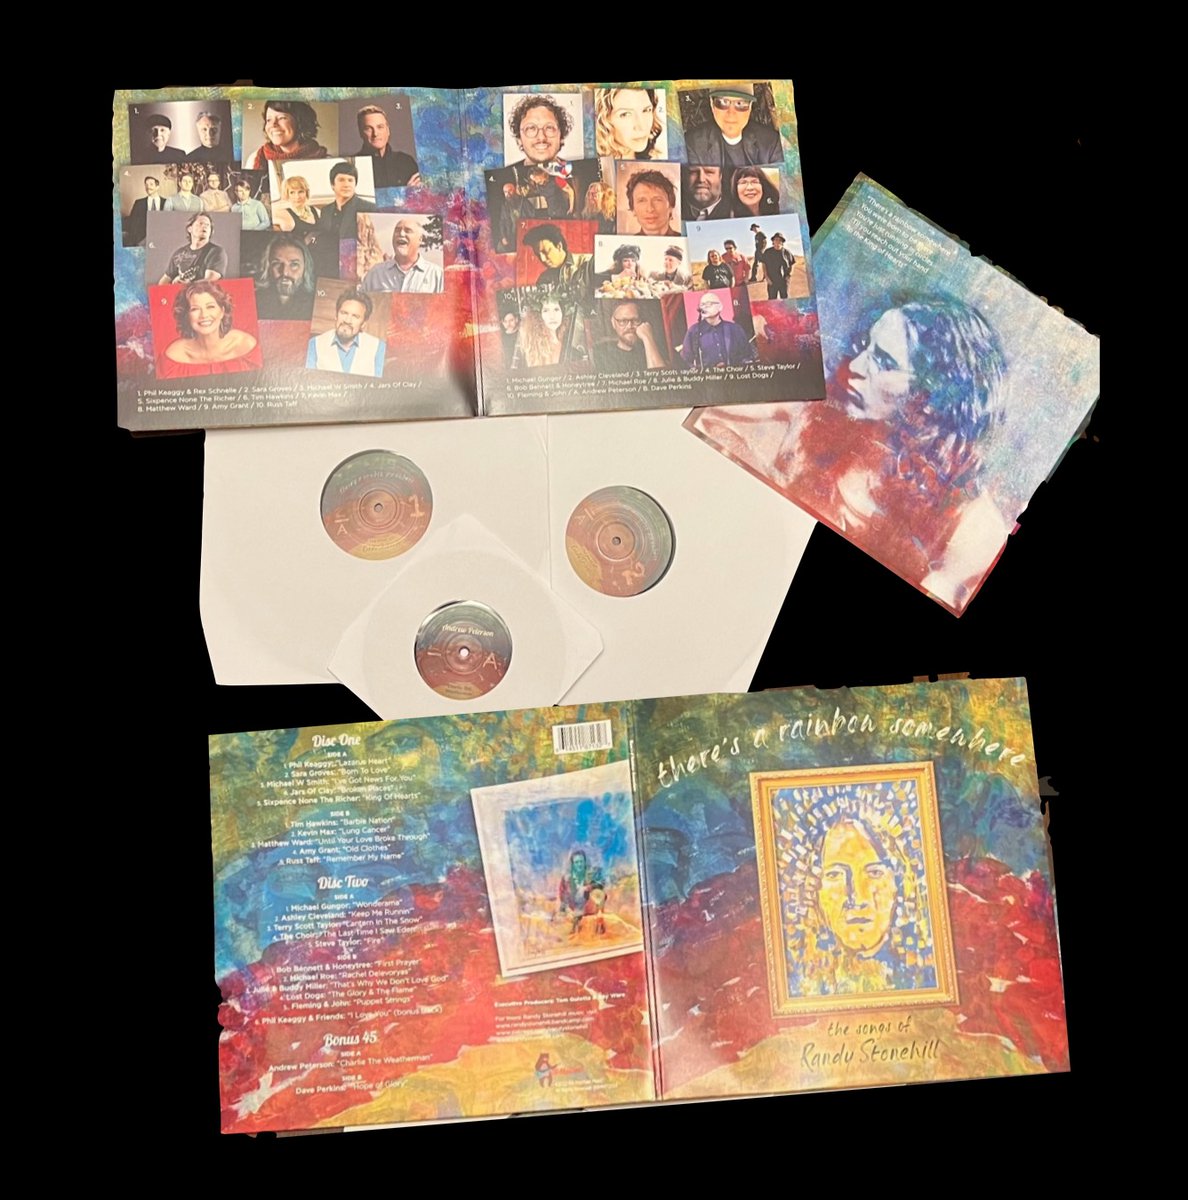 'There's a Rainbow Somewhere', the project commemorating 50 years since the release of Randy's first album, ('Born Twice') is available at the Stonehill Store...including VINYL!! randy-stonehill.square.site